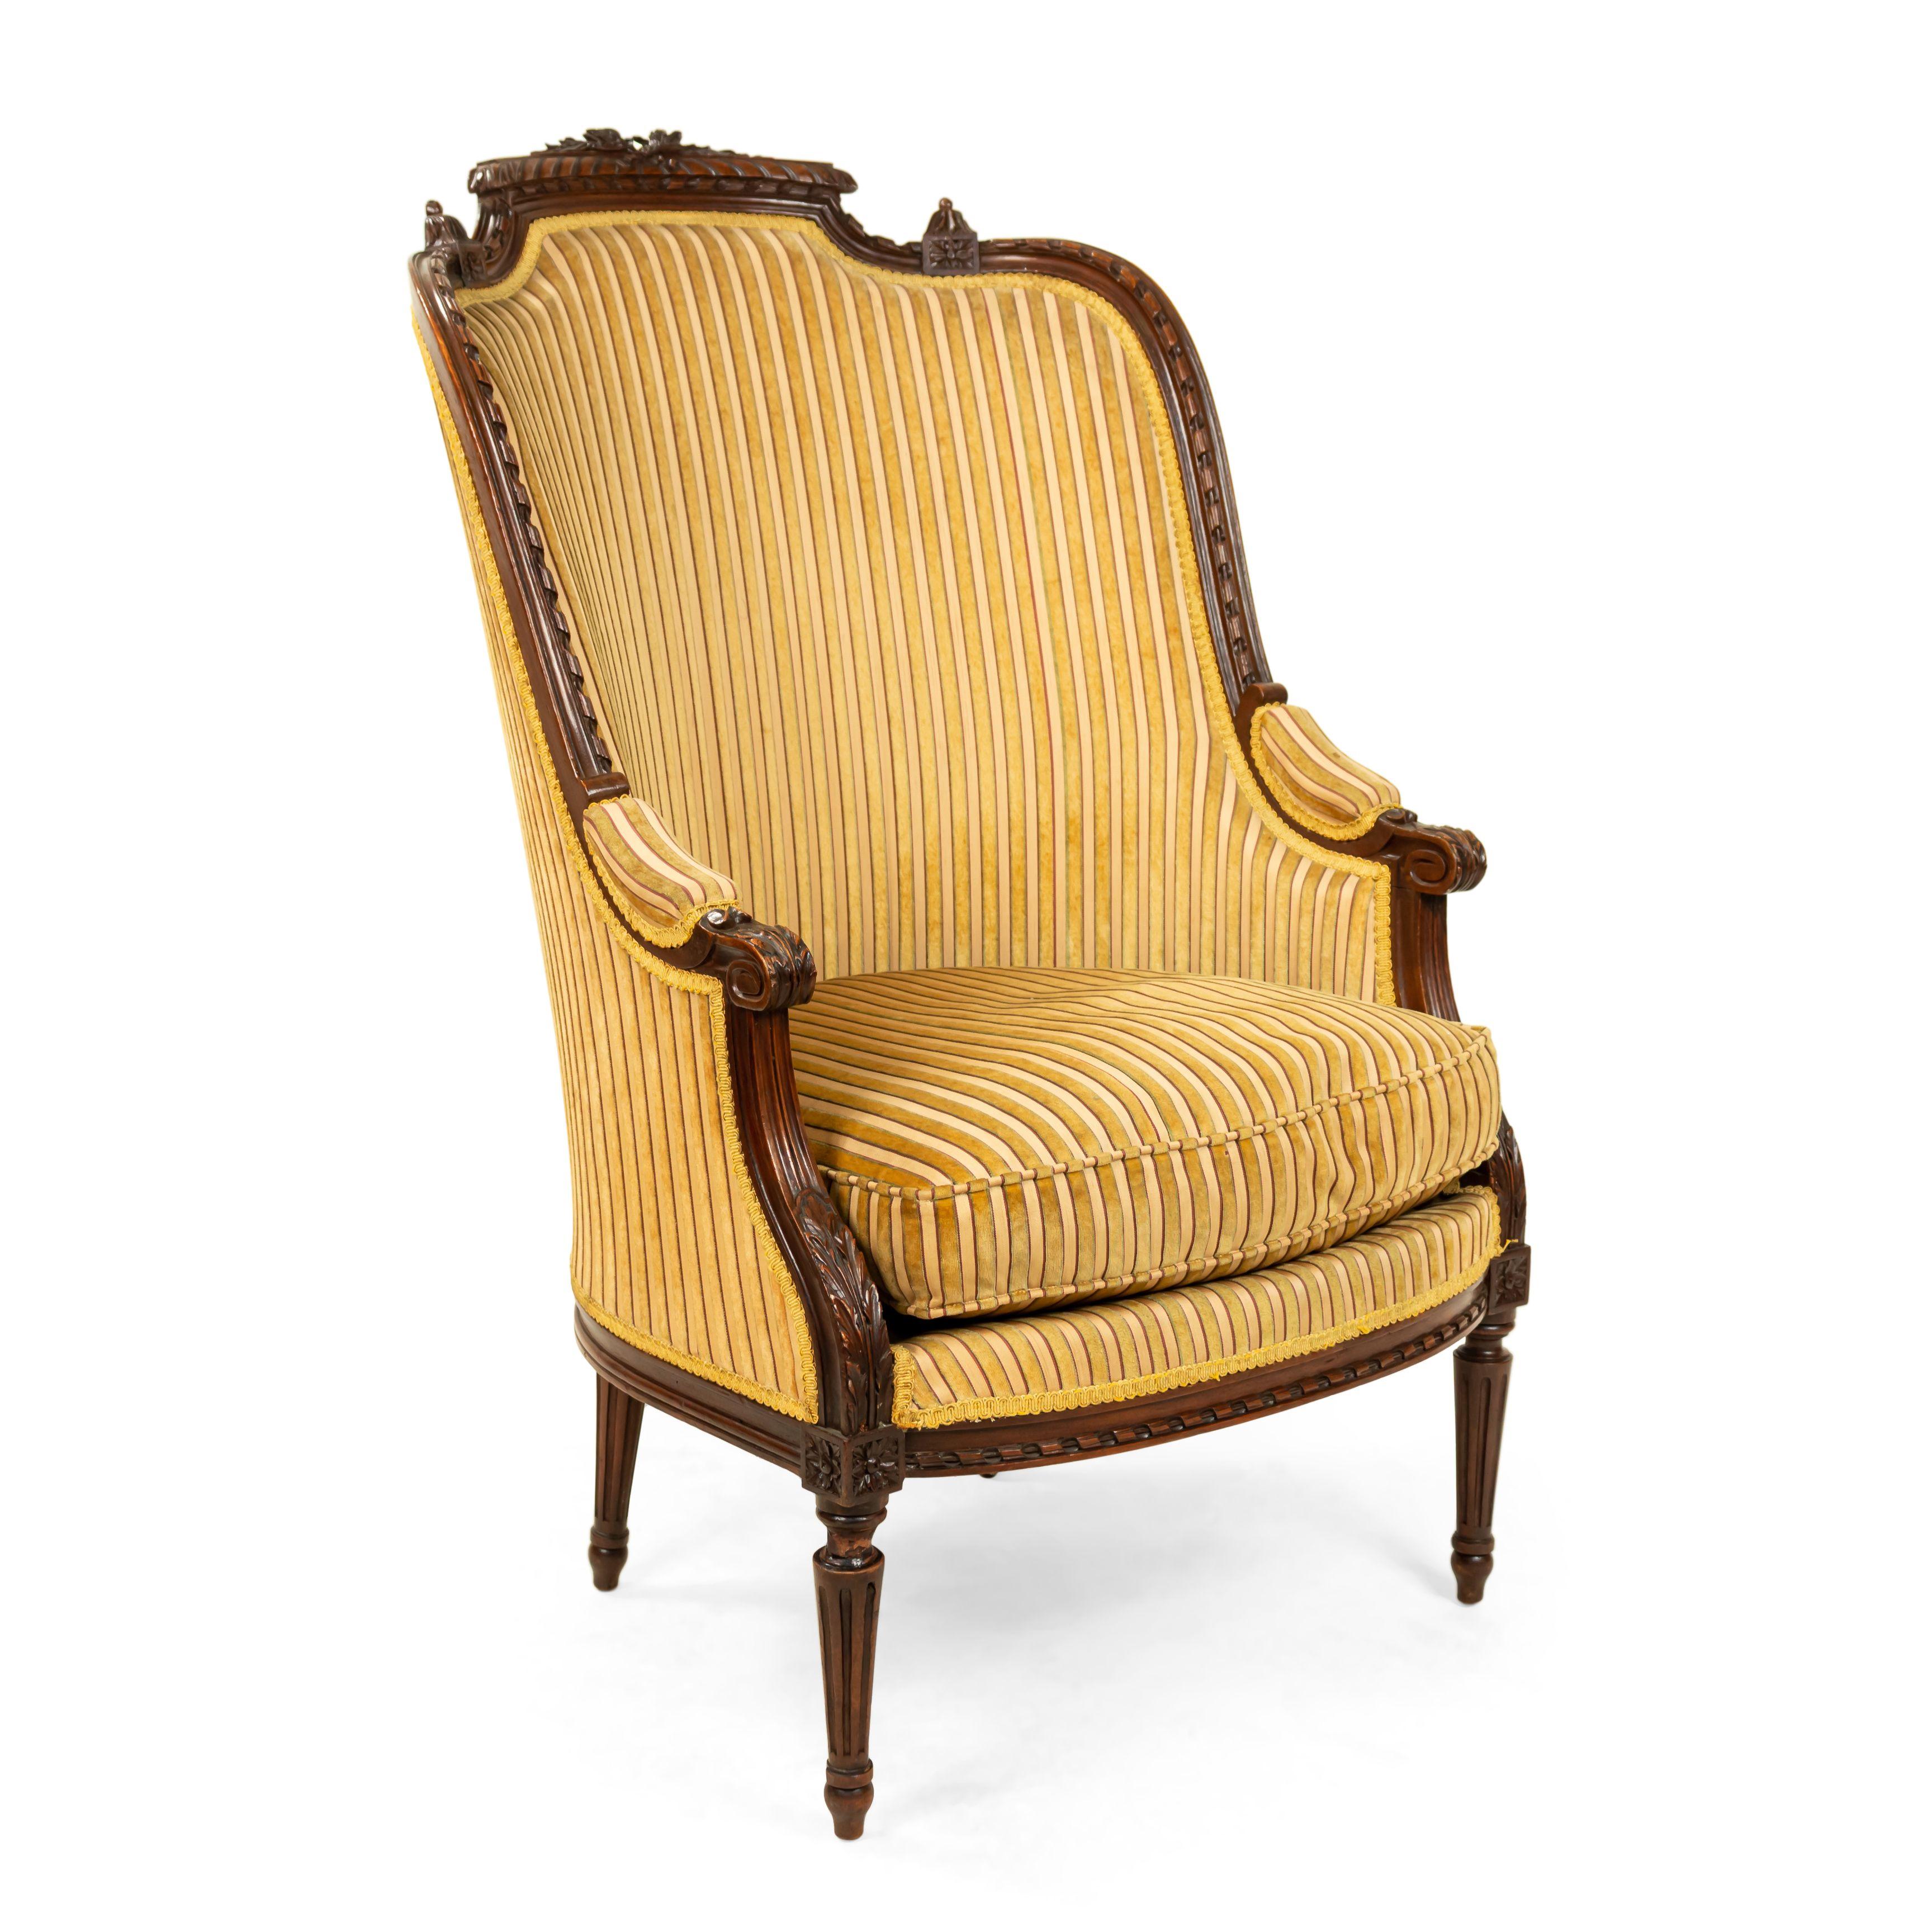 Pair of French Louis XVI style (19th century) walnut bergère armchairs with bow knot top and striped upholstery.